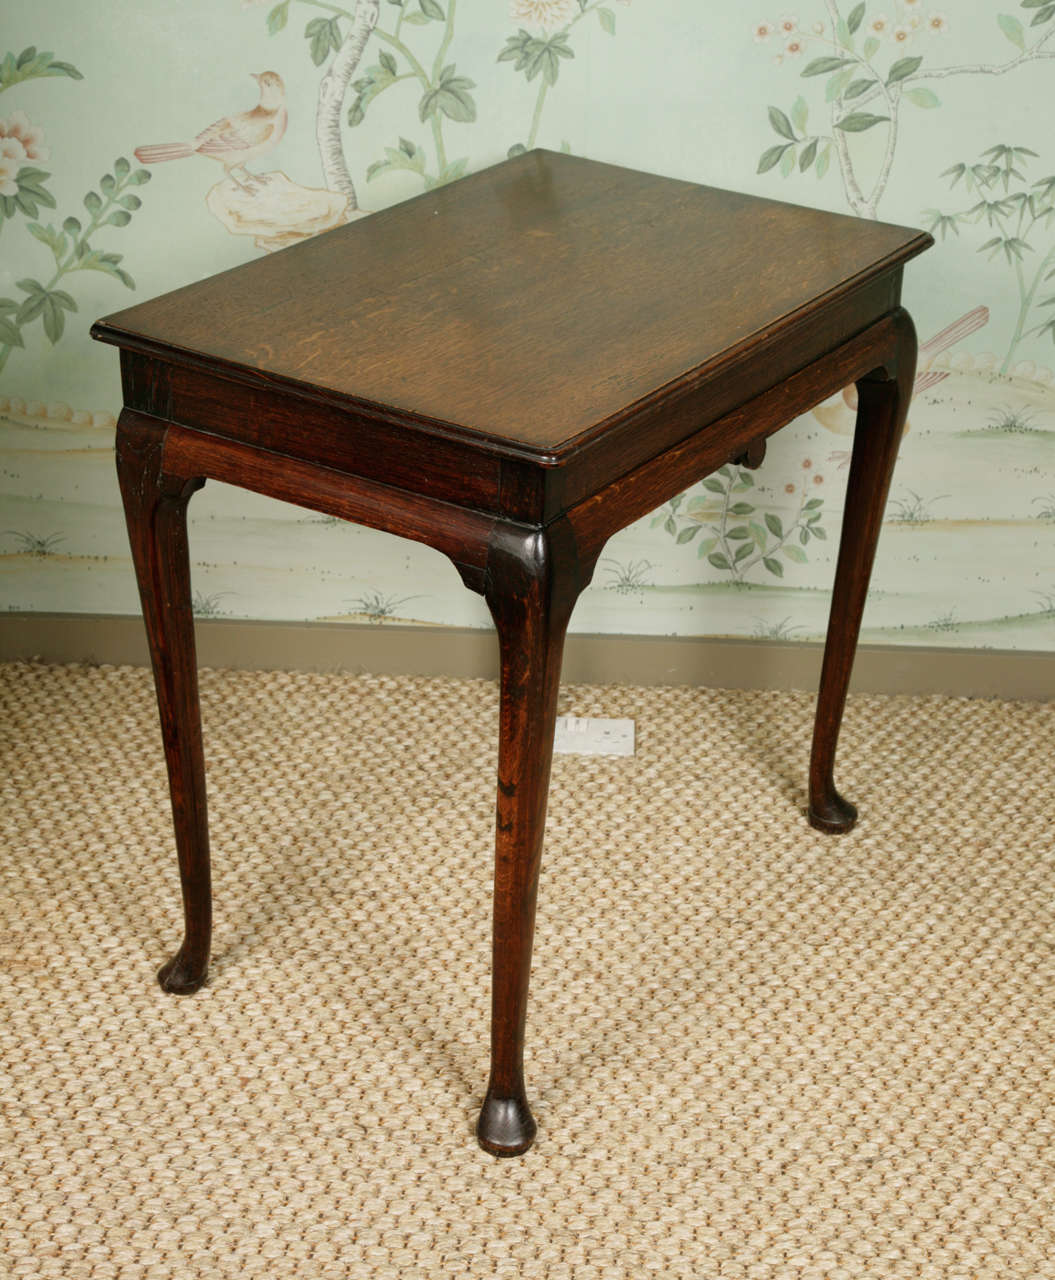 A charming small Georgian oak side table with a moulded edge top on a plain frieze with a central medallion. On cabriole legs with pad feet. The table dates from the first half of the 18th century. It has a nice patination, the top being somewhat